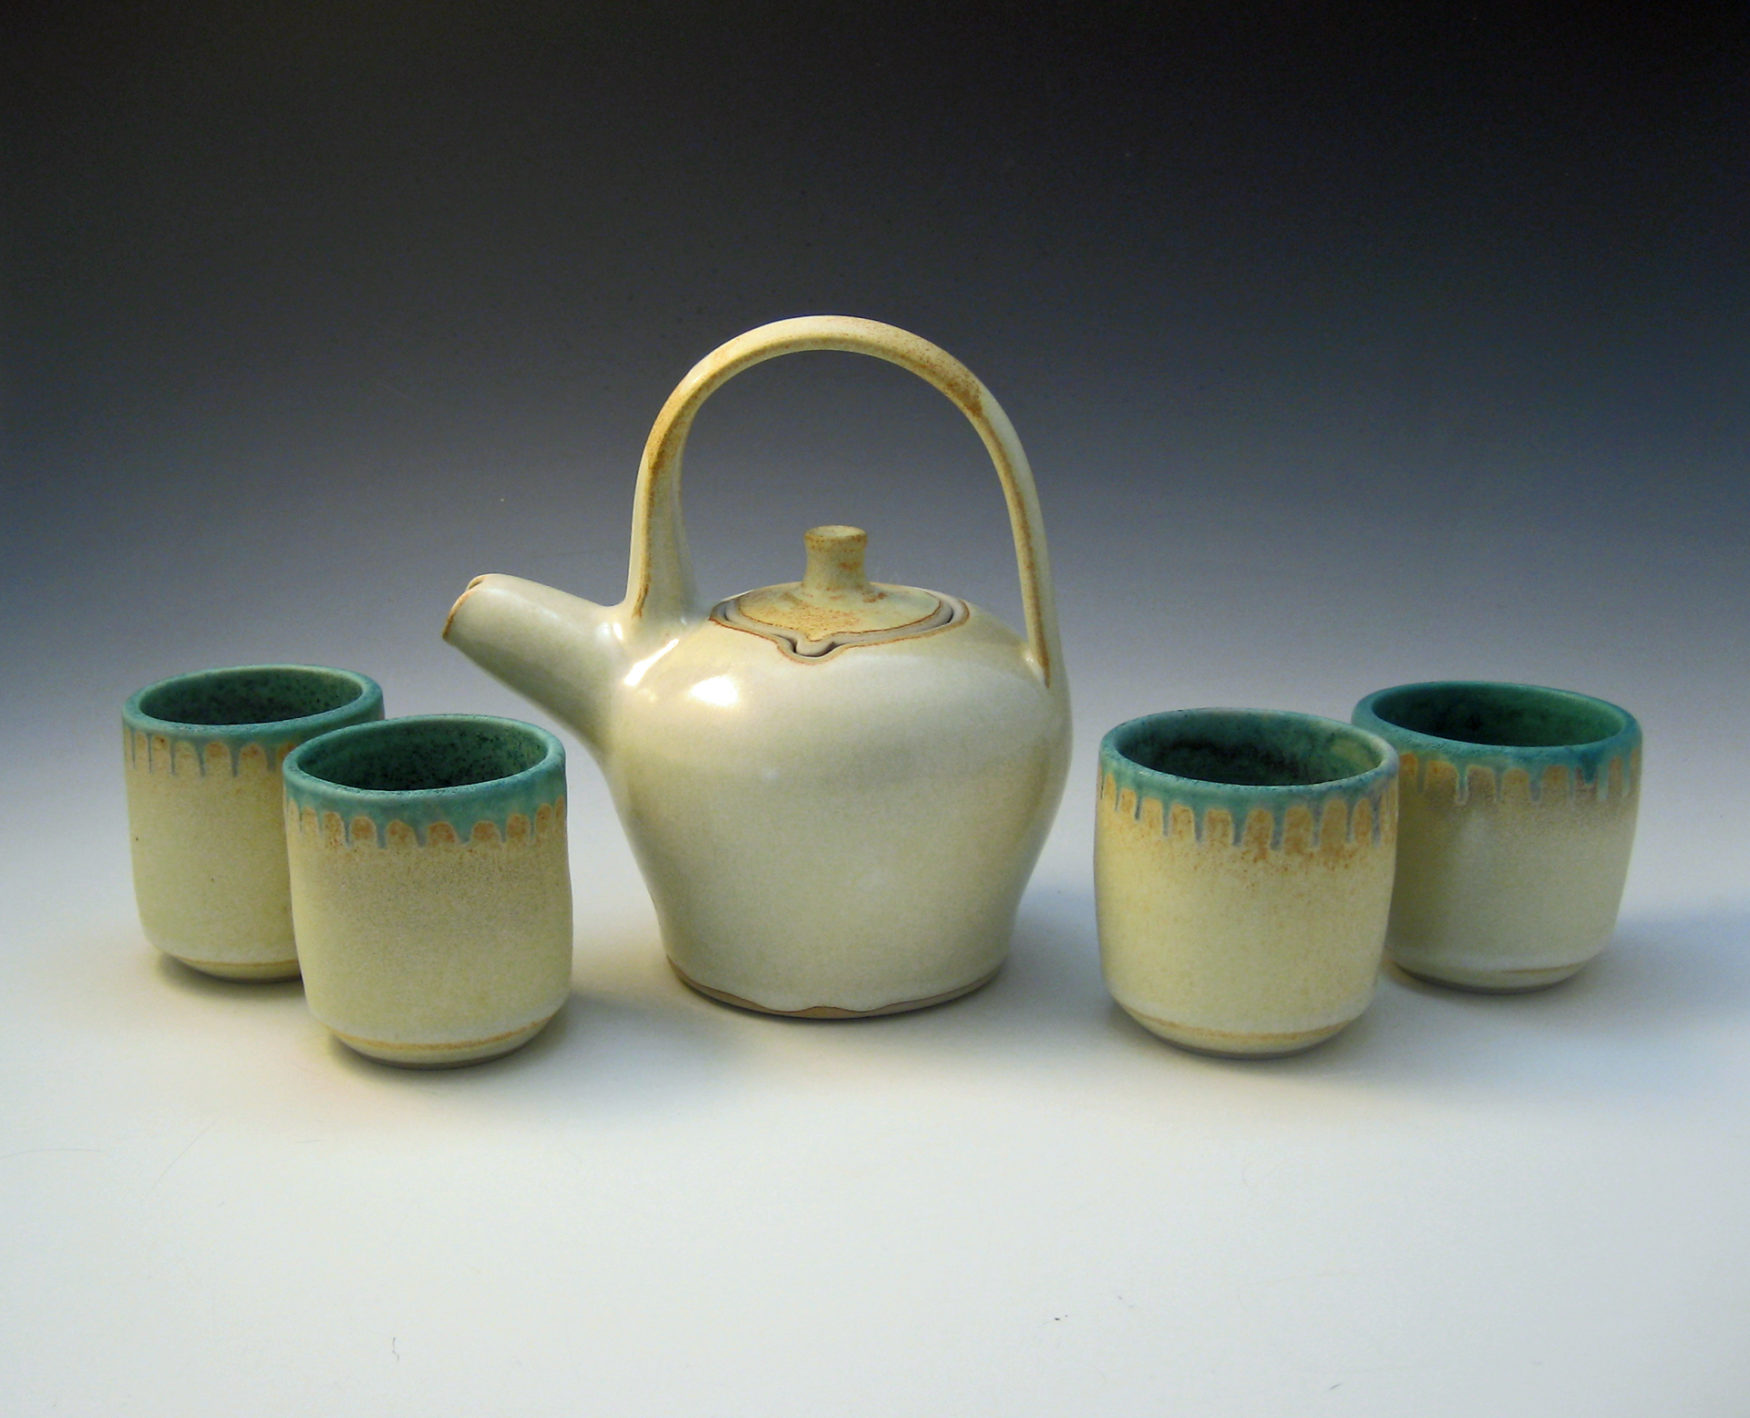 Homeport pottery – Maine Made